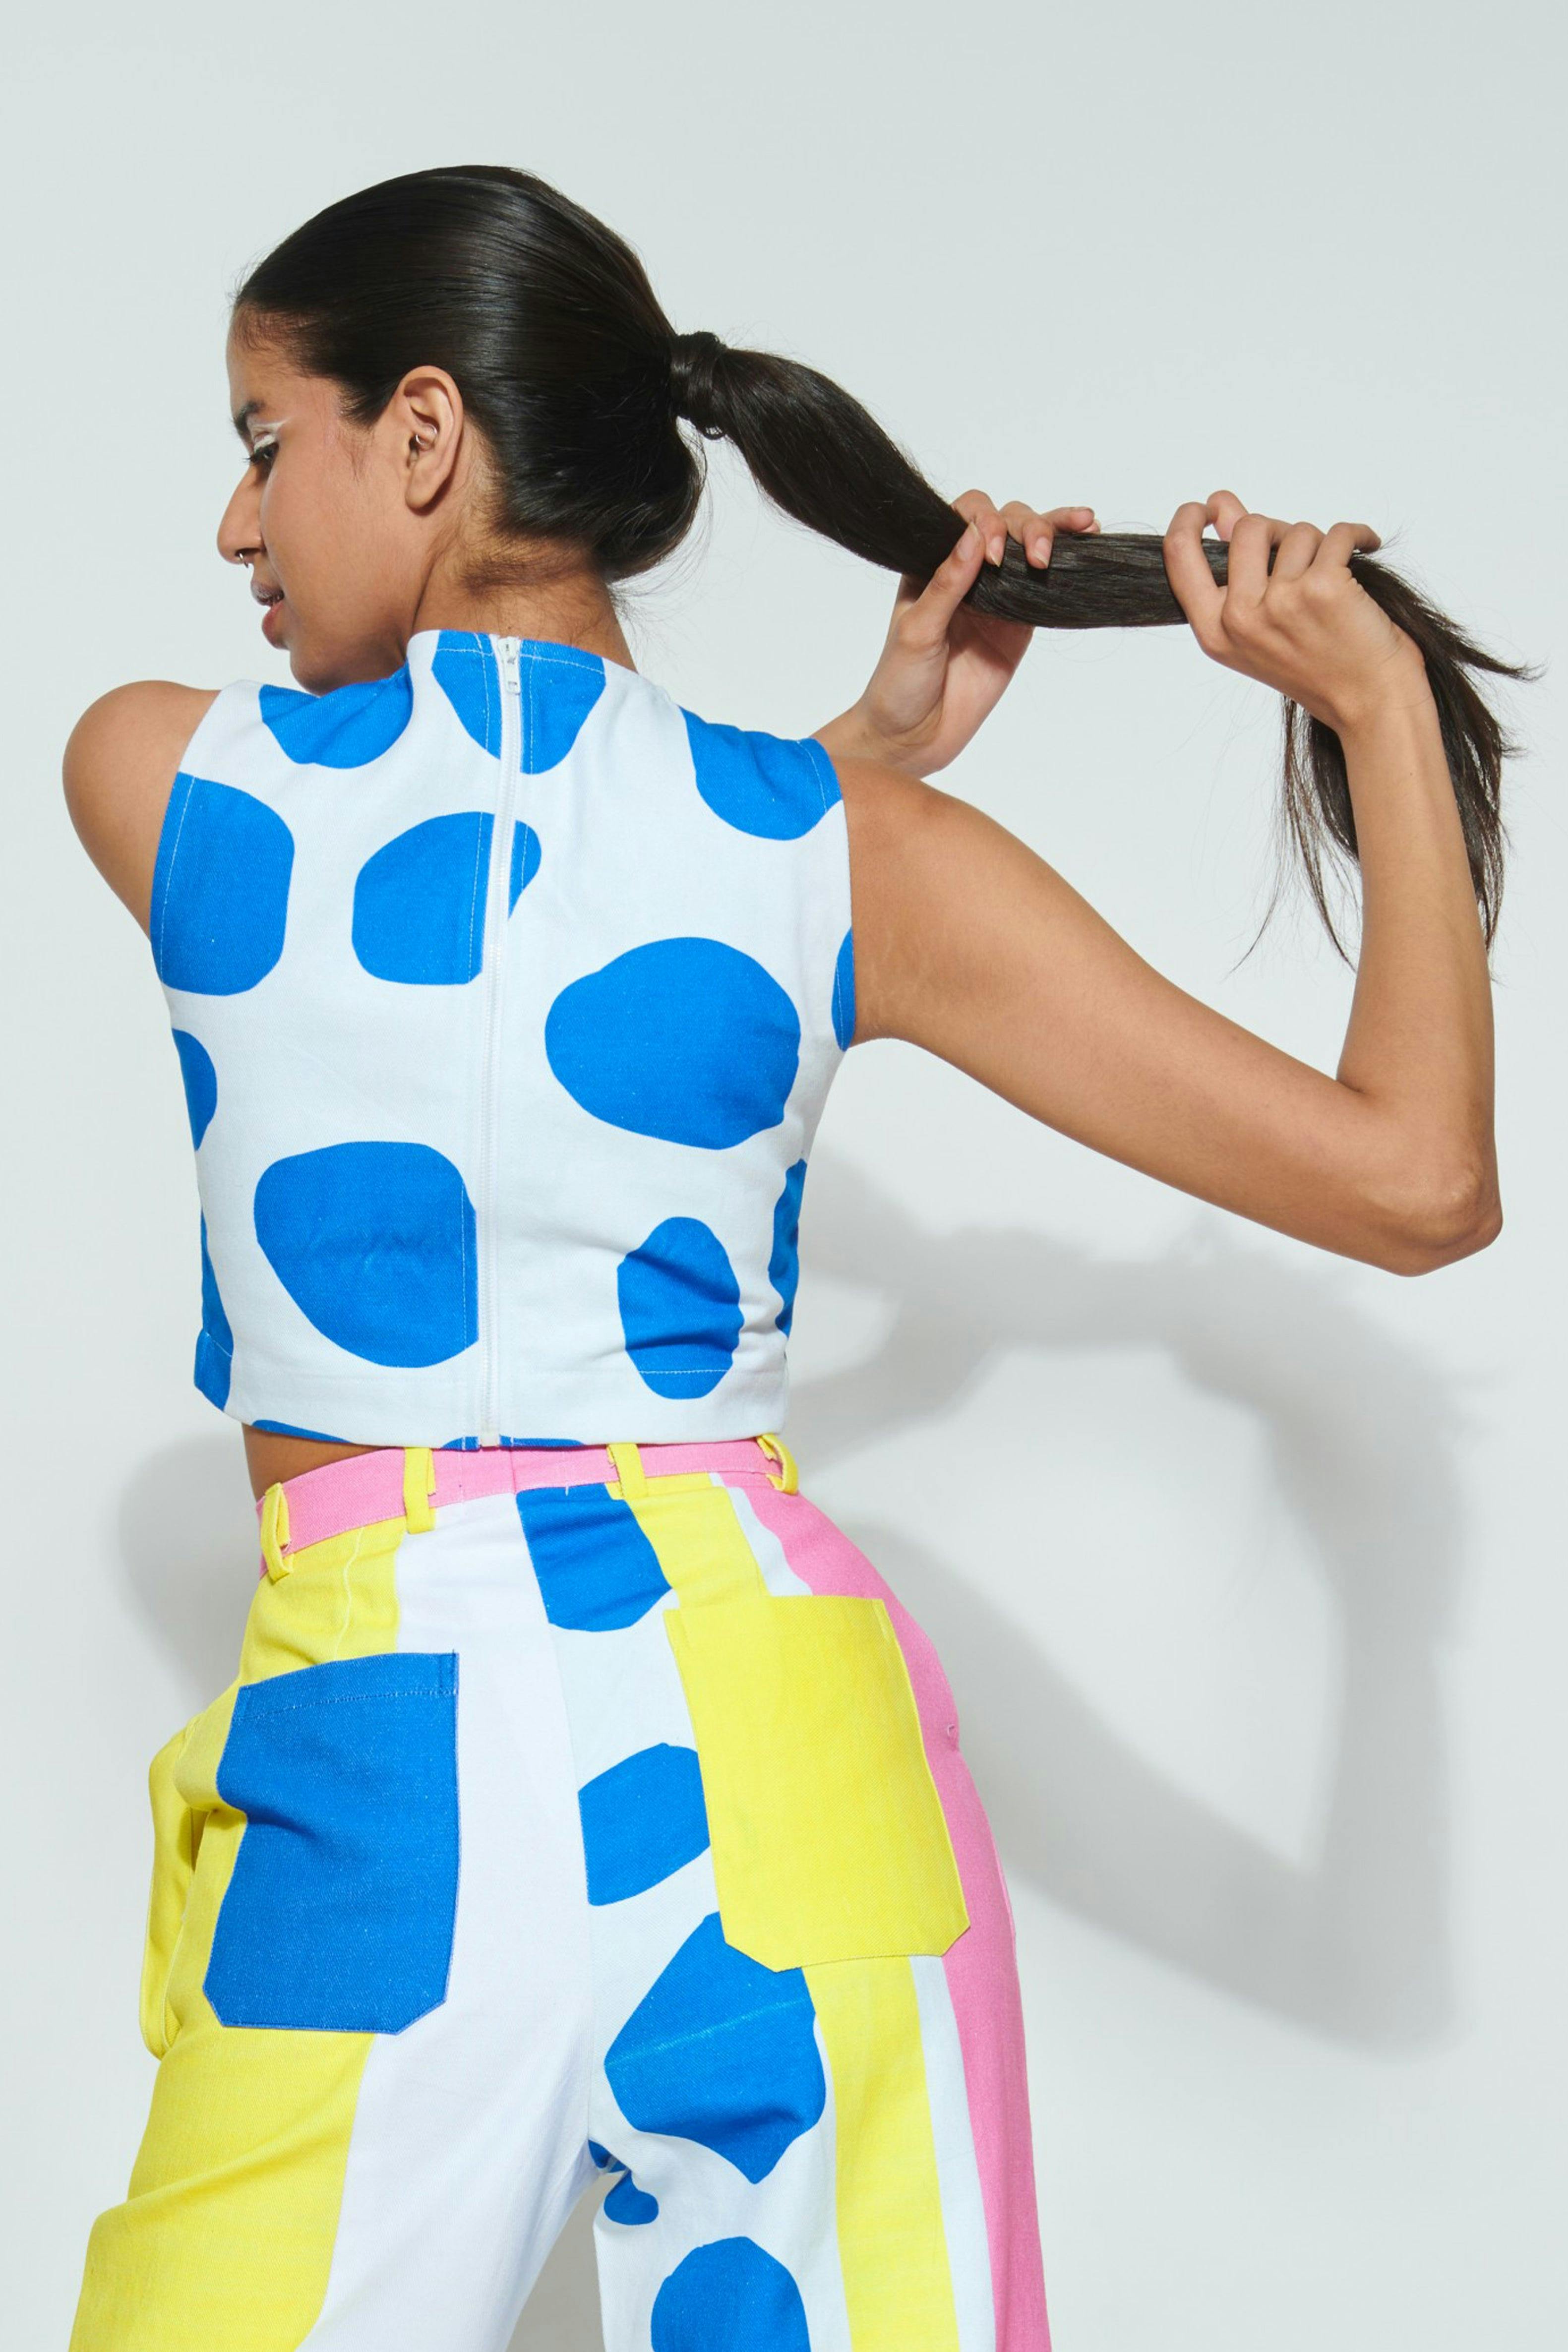 HIGH GIRAFFE CROP TOP - PART OF SET, a product by Sazo